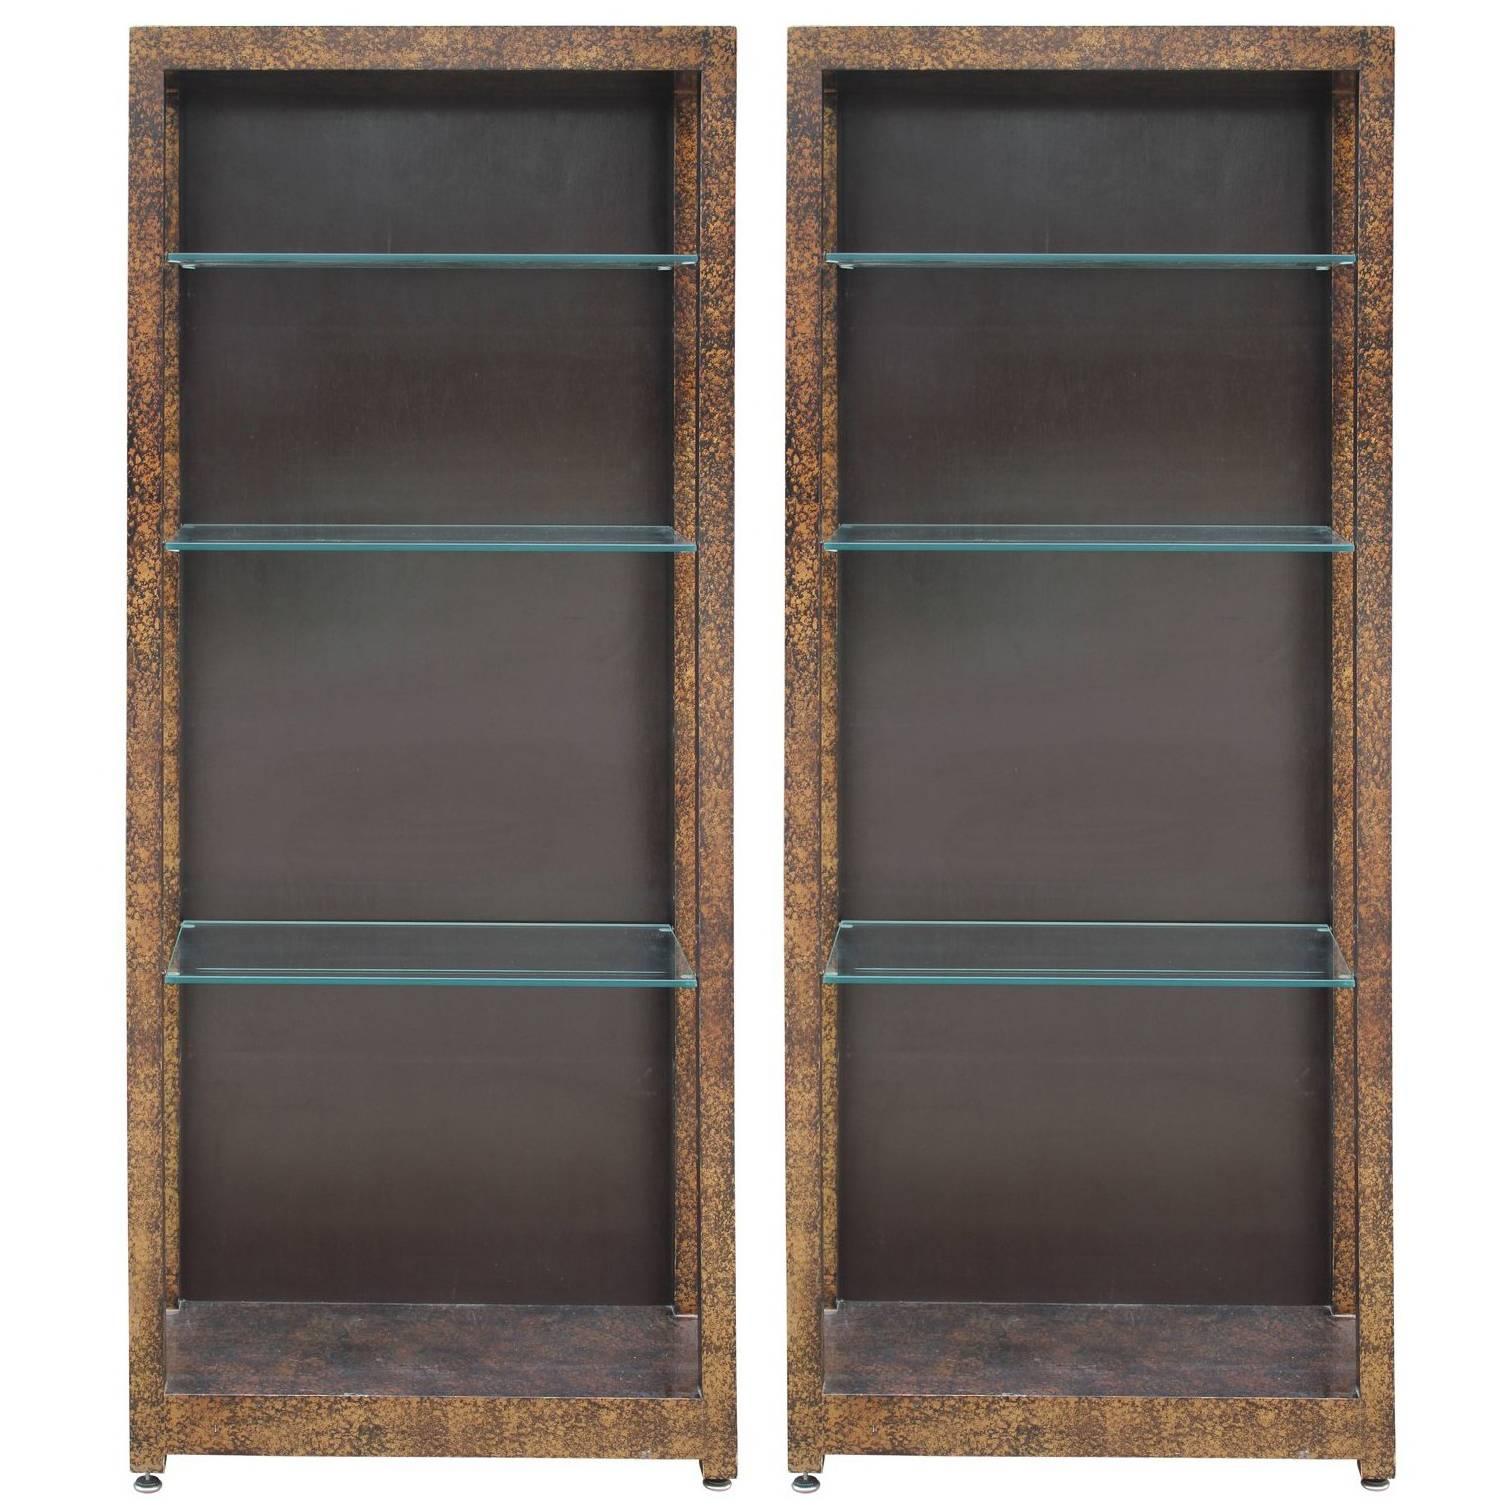 Pair Modern Henredon Oil Drop Display / Book Cases with Tortoise Finish